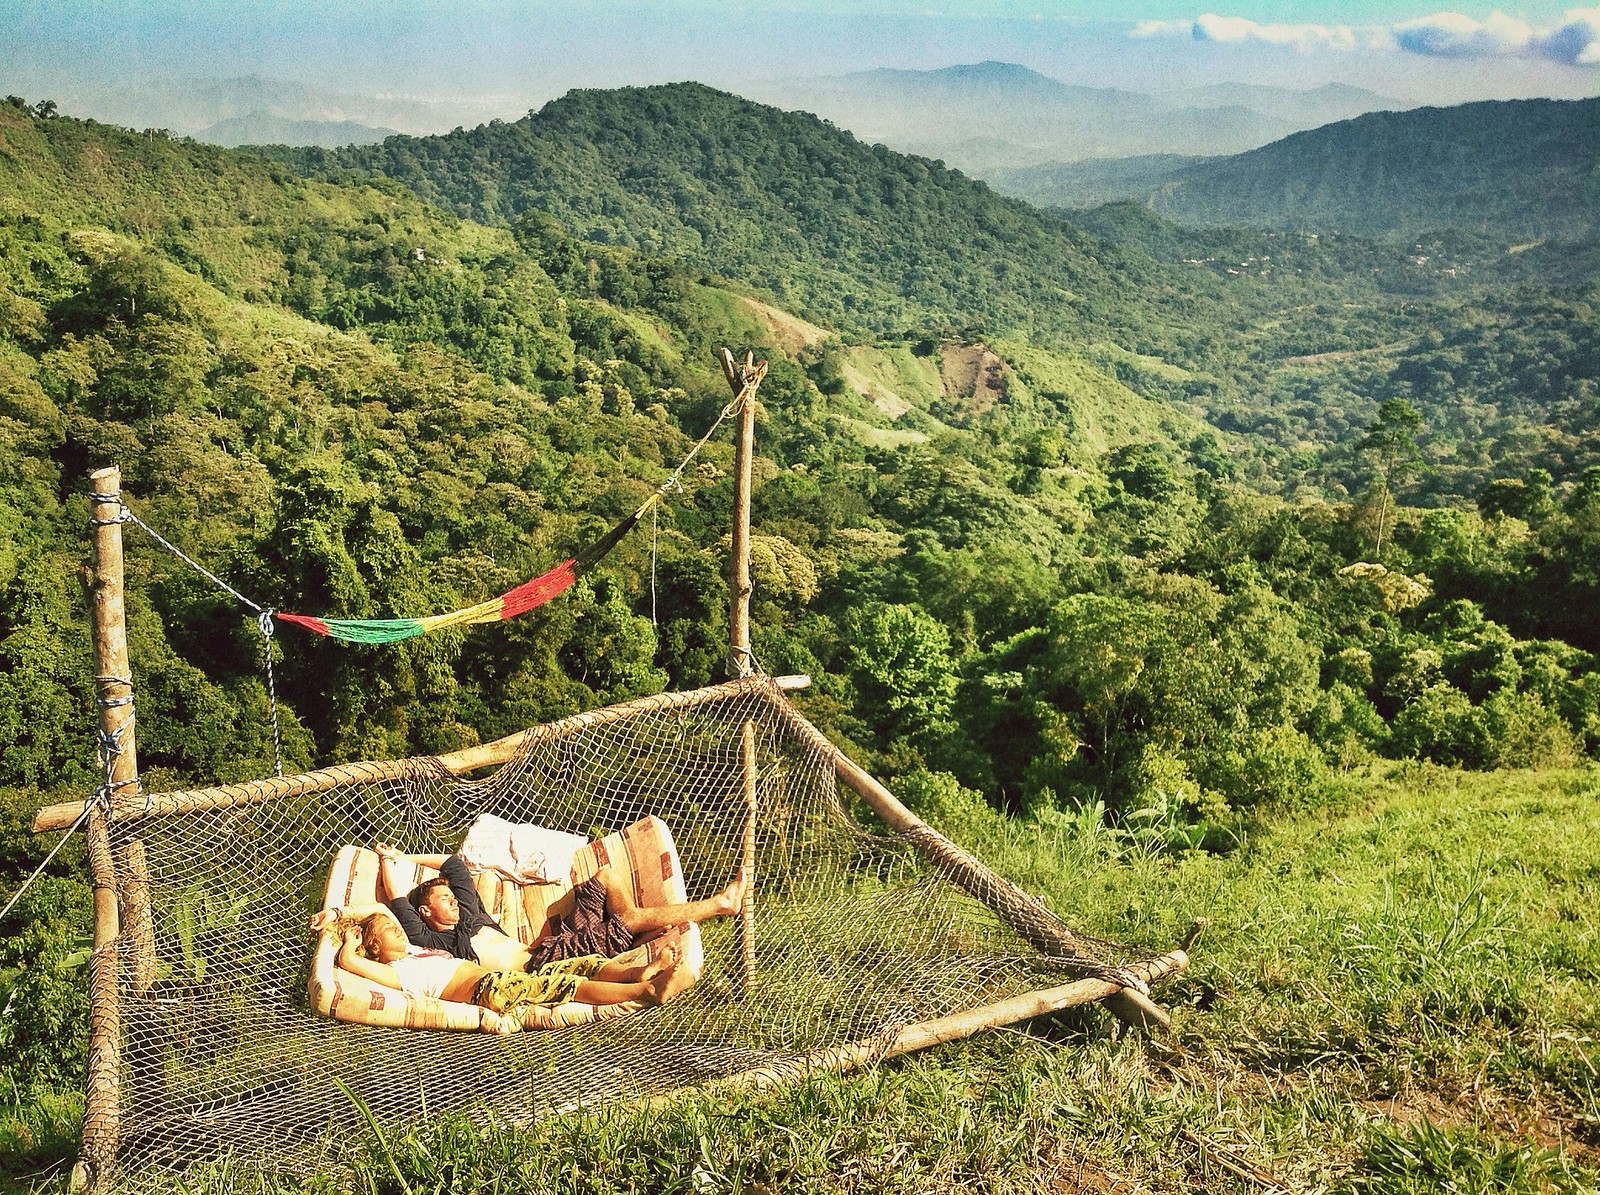 Hammock with a view at Casa Elemento hostel in Minca, Colombia